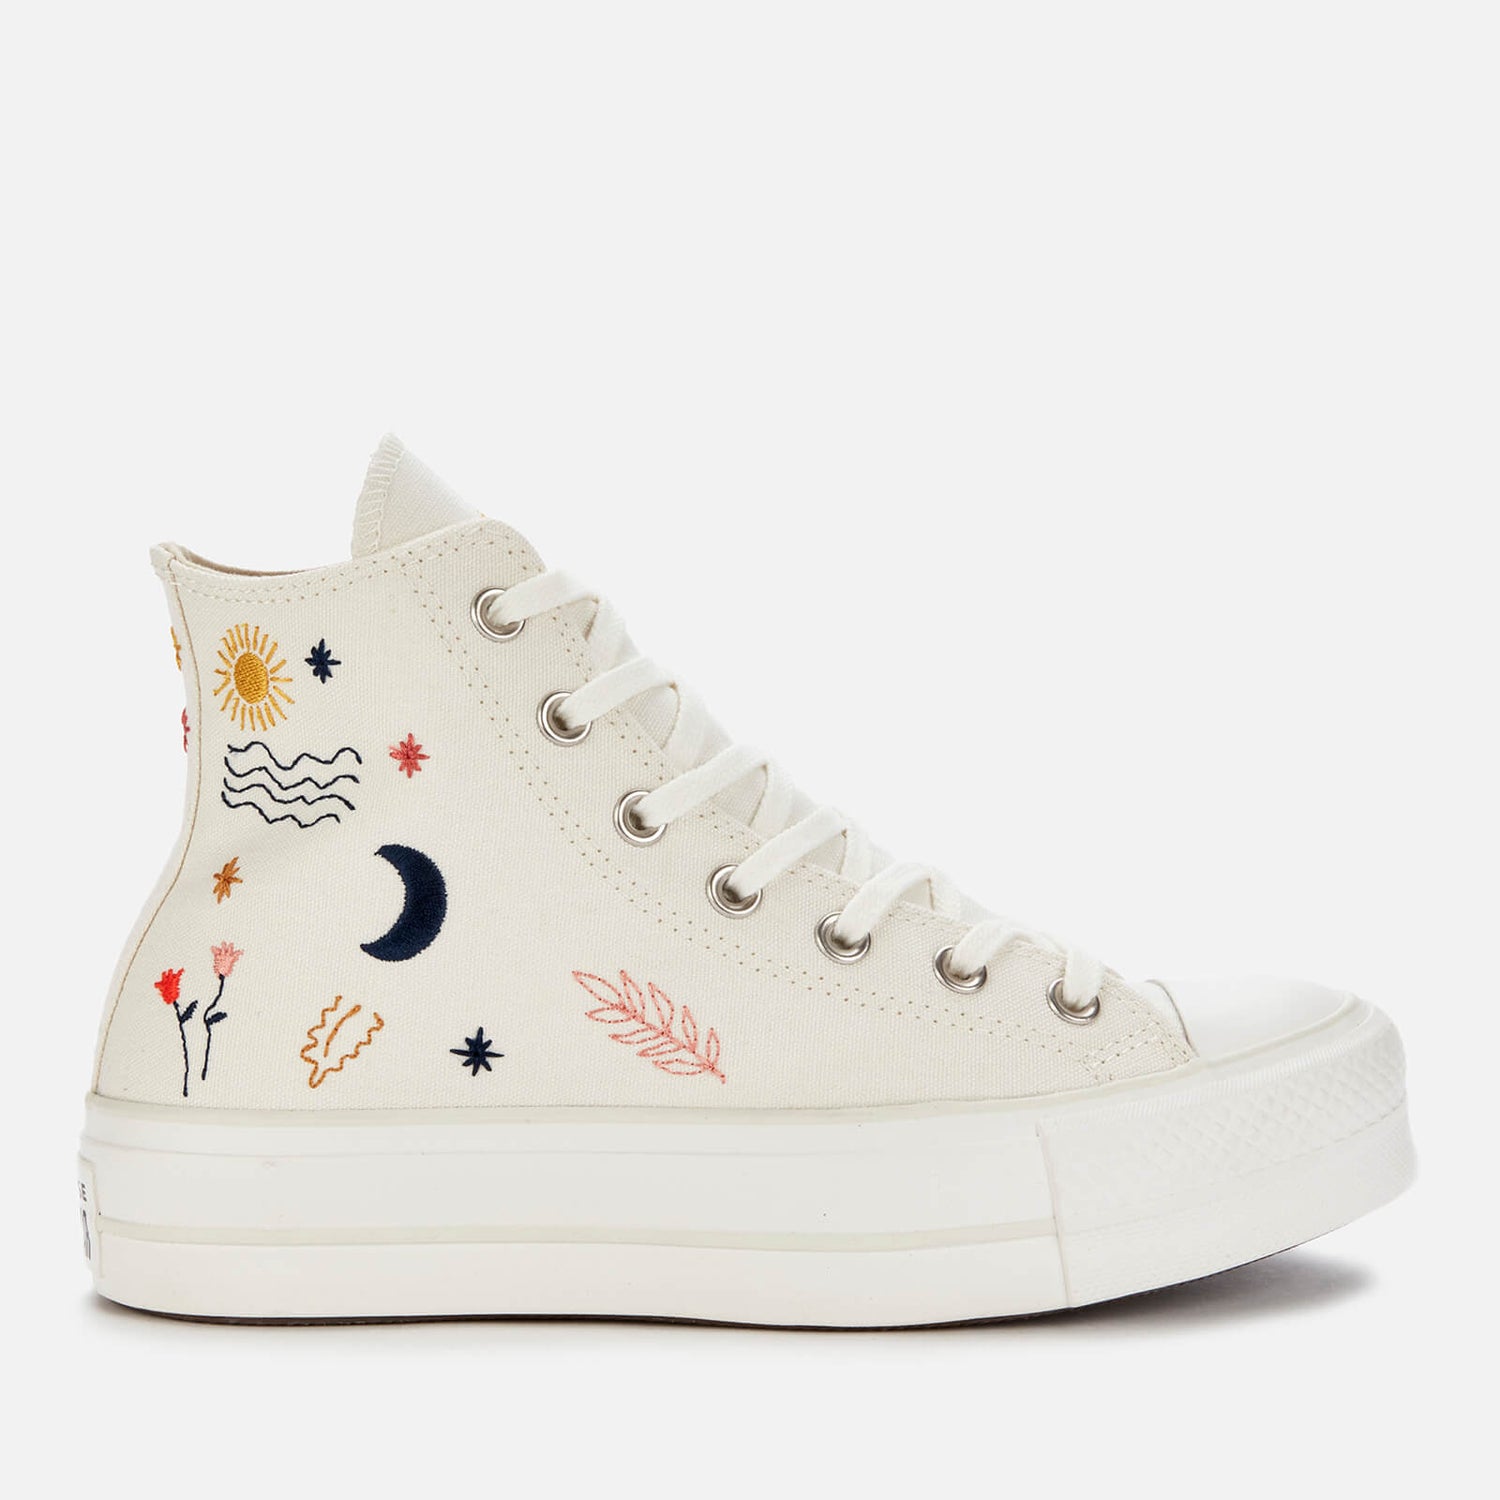 Converse Women's Chuck Taylor All Star It's Ok To Wander Lift Hi-Top Trainers - Egret/Vintage White/Black